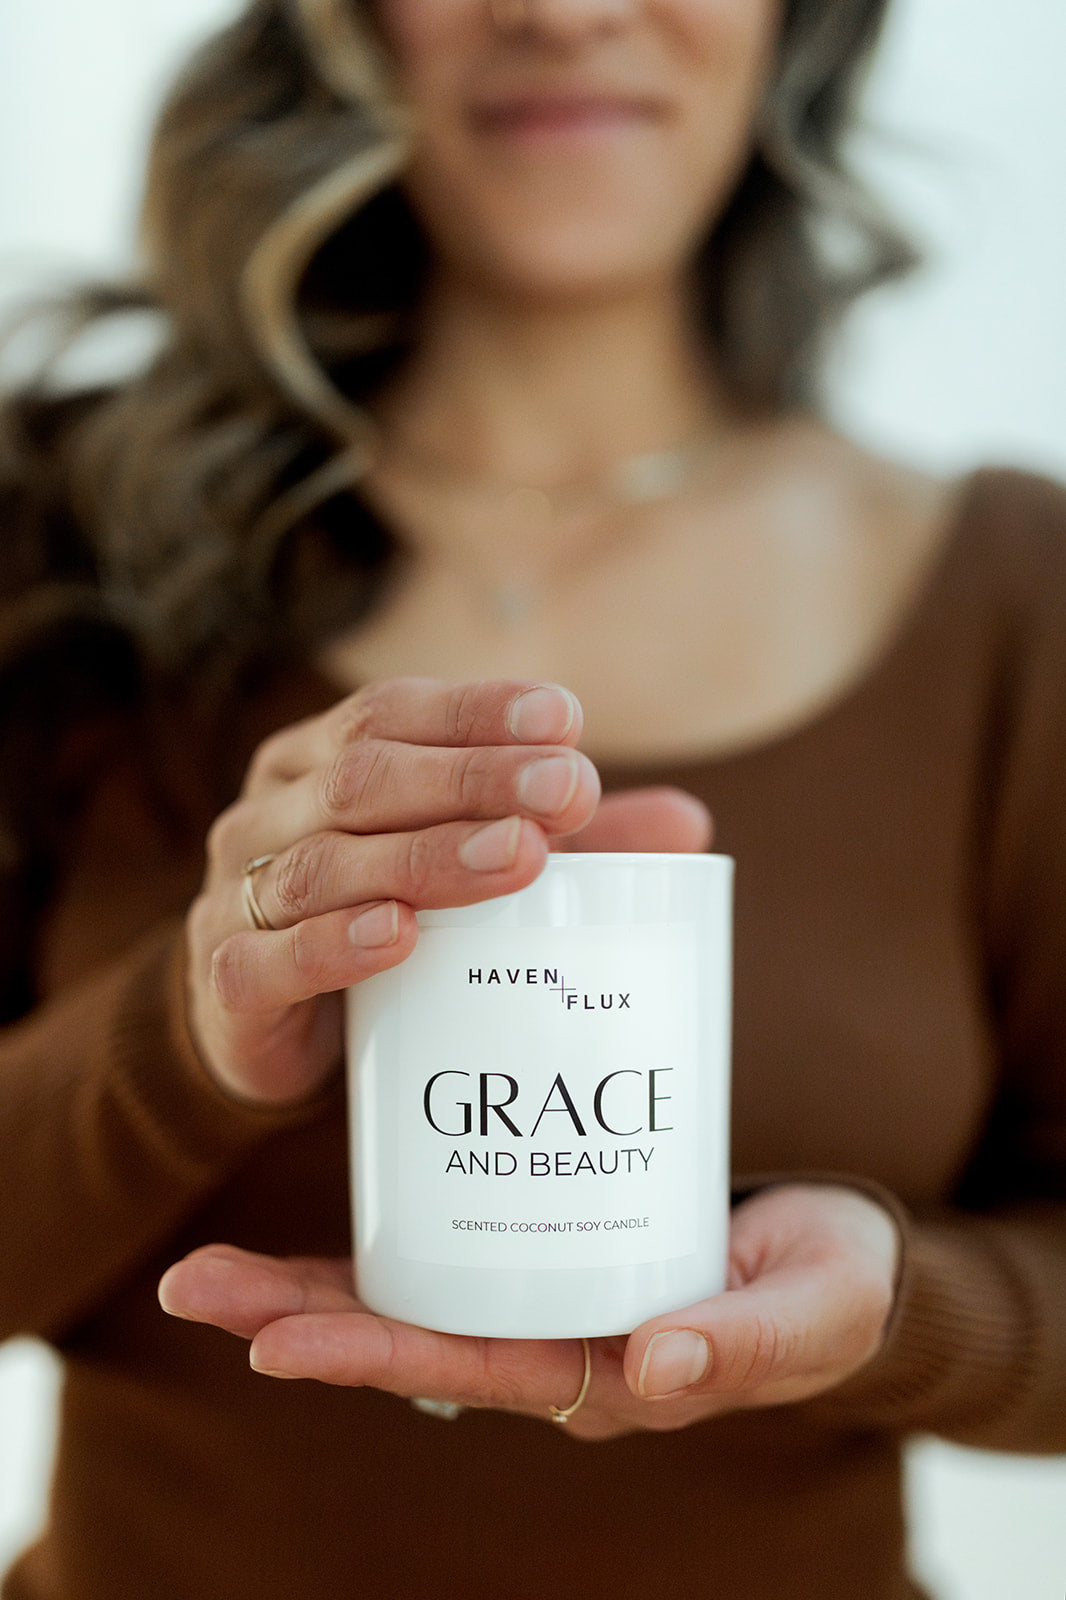 Grace Wooden Wick Candle featuring a luxurious blend of orange blossoms, dewy gardenia, and spiced vanilla scent notes. Crafted with high-quality, non-toxic ingredients, this candle embodies the essence of beauty and grace in its various forms, from delicate blooms to warm spices.